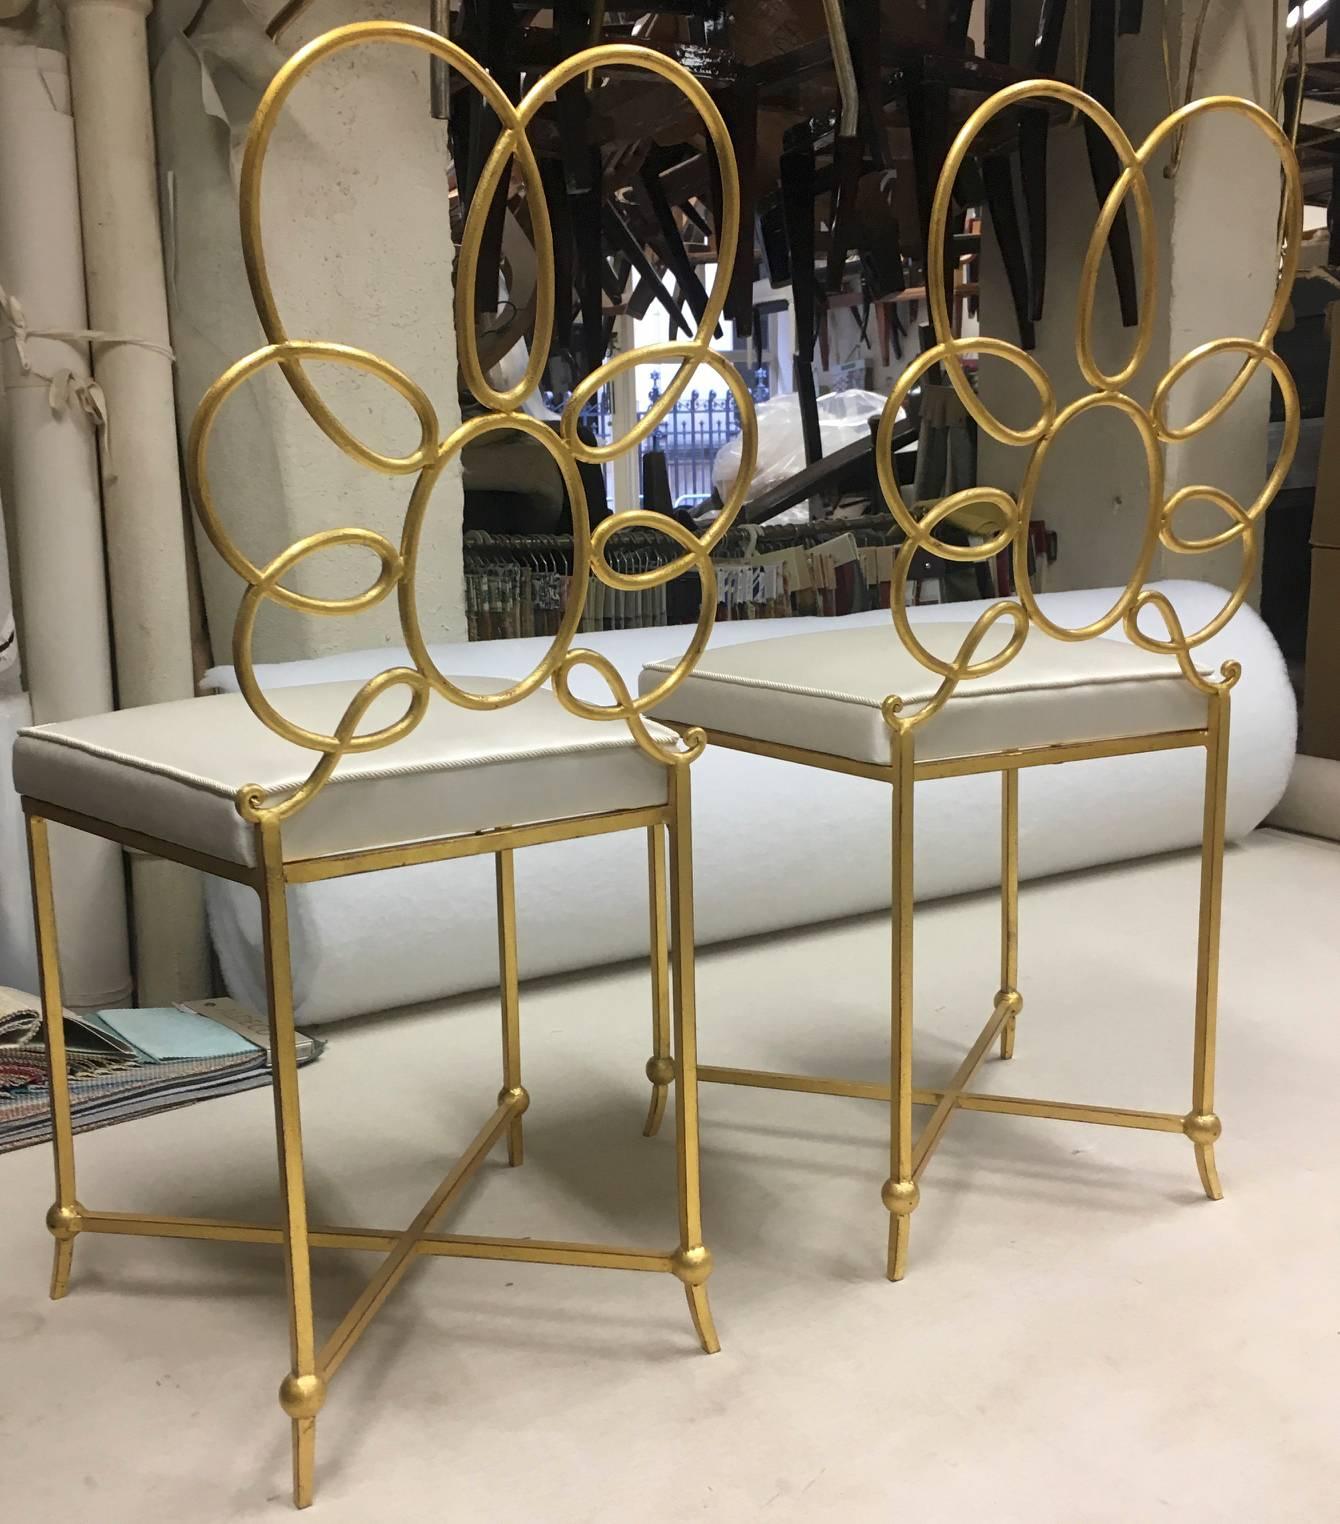 Mid-Century Modern Rene Prou Rare Superb Witty Four-Flower Gold Leaf Wrought Iron Chairs in Silk For Sale